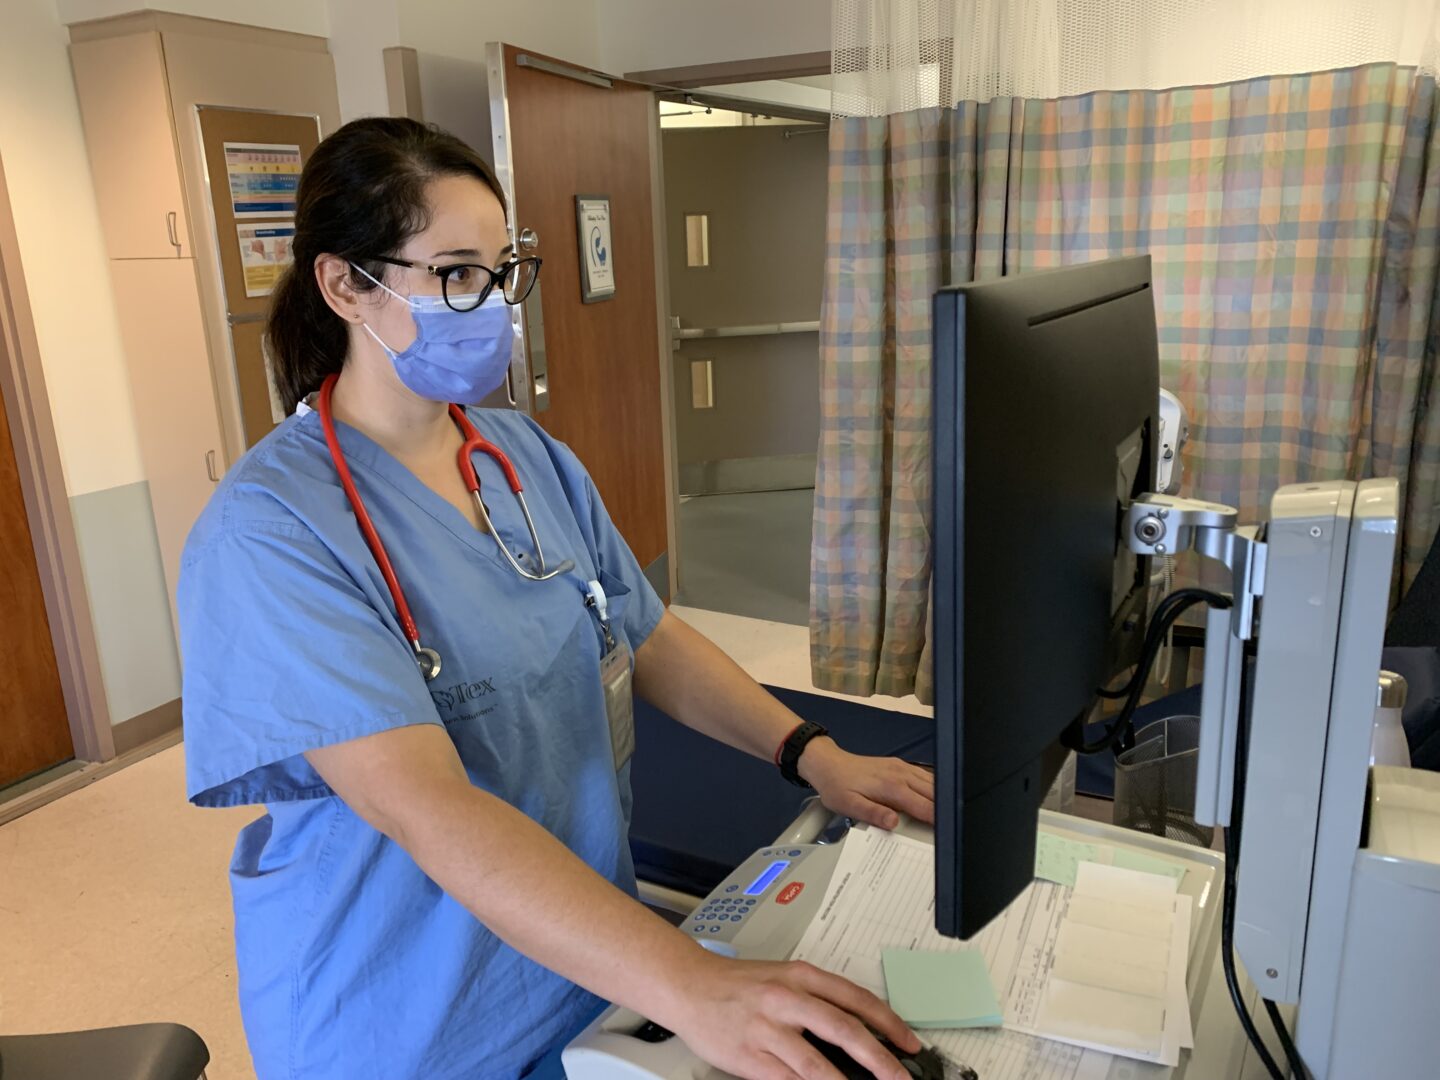 A nurse standing up and working in front of a computer.